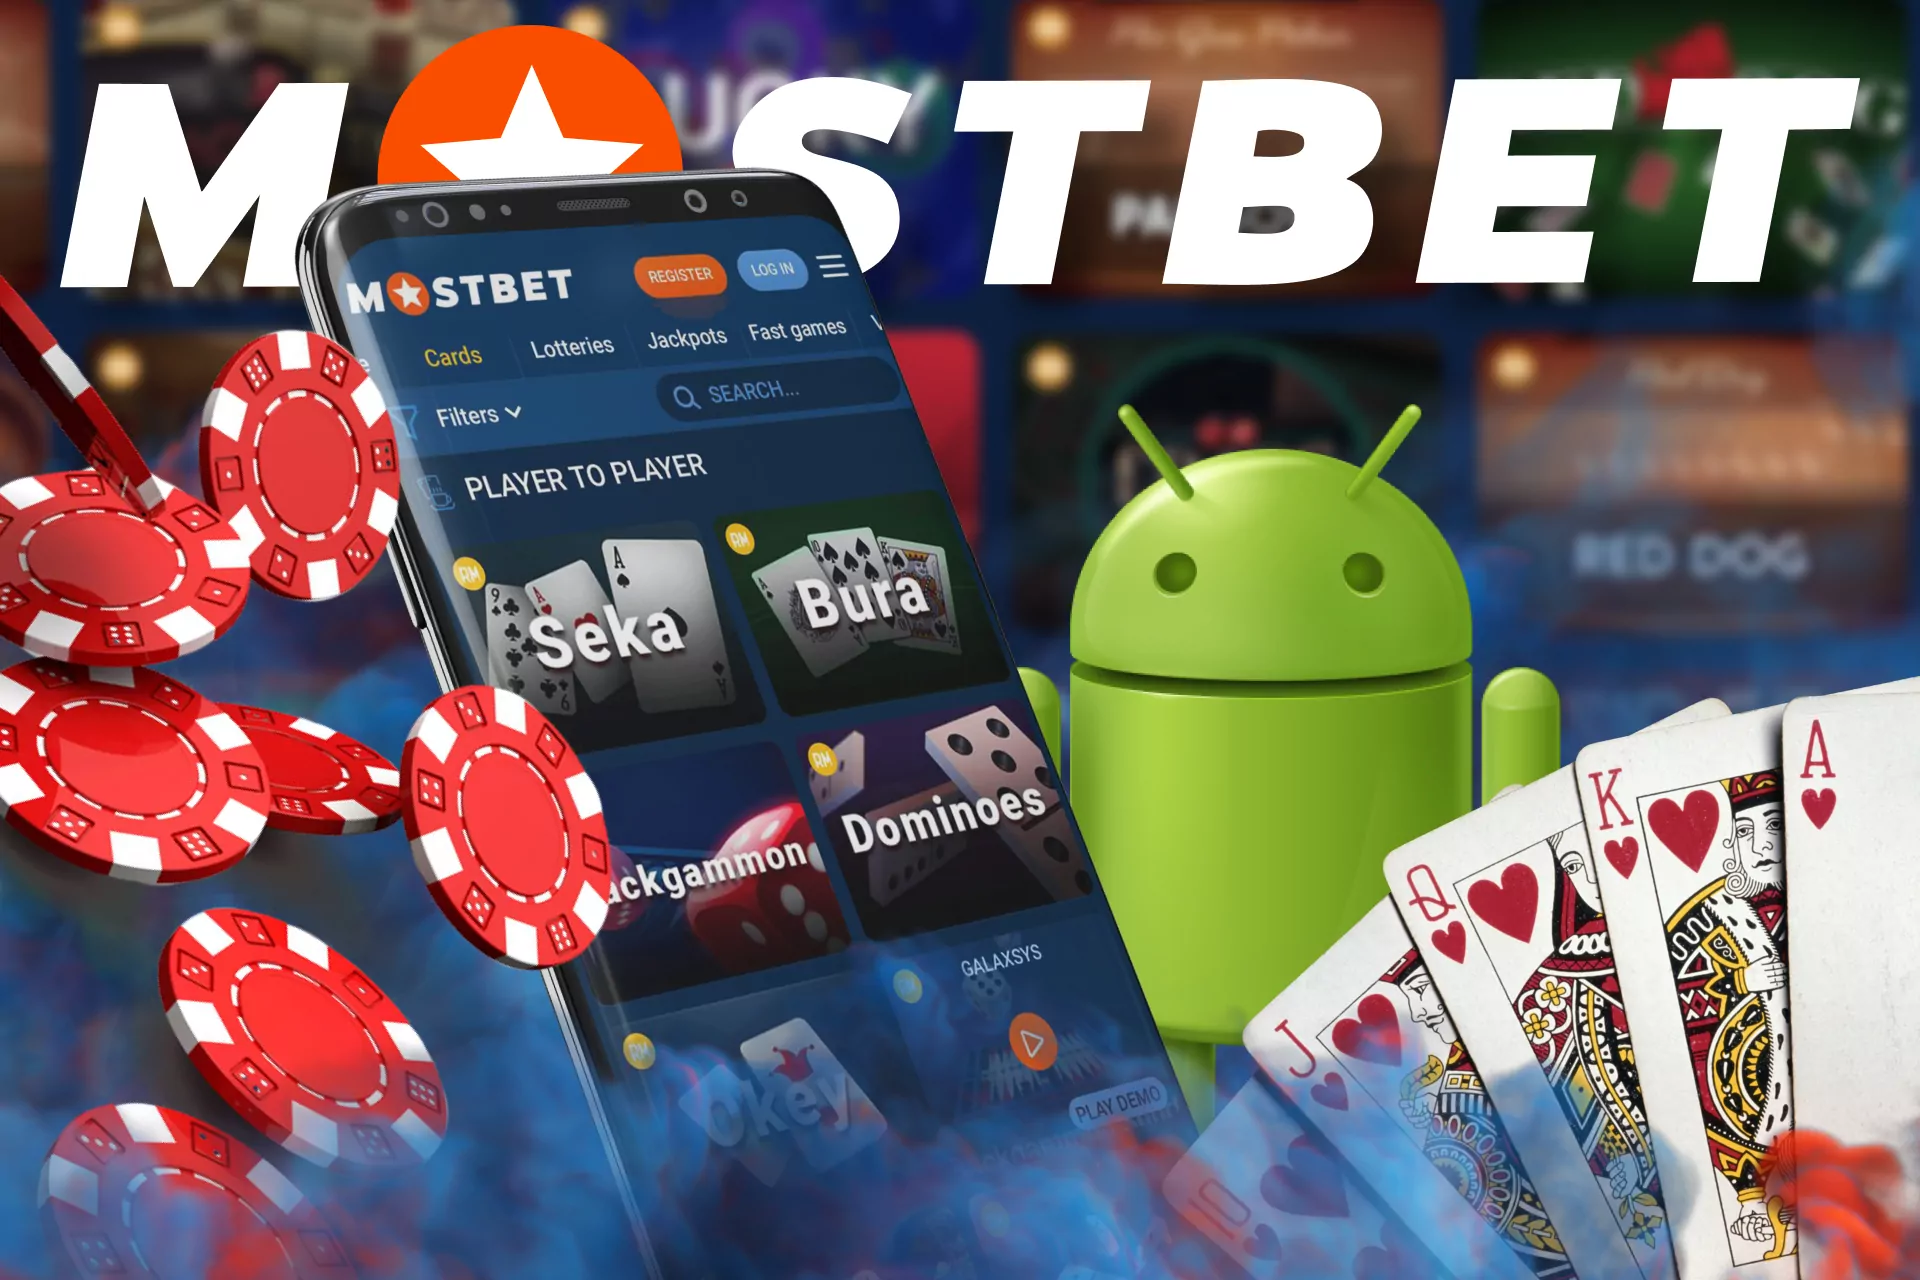 At Mostbet, play games on your Android device.